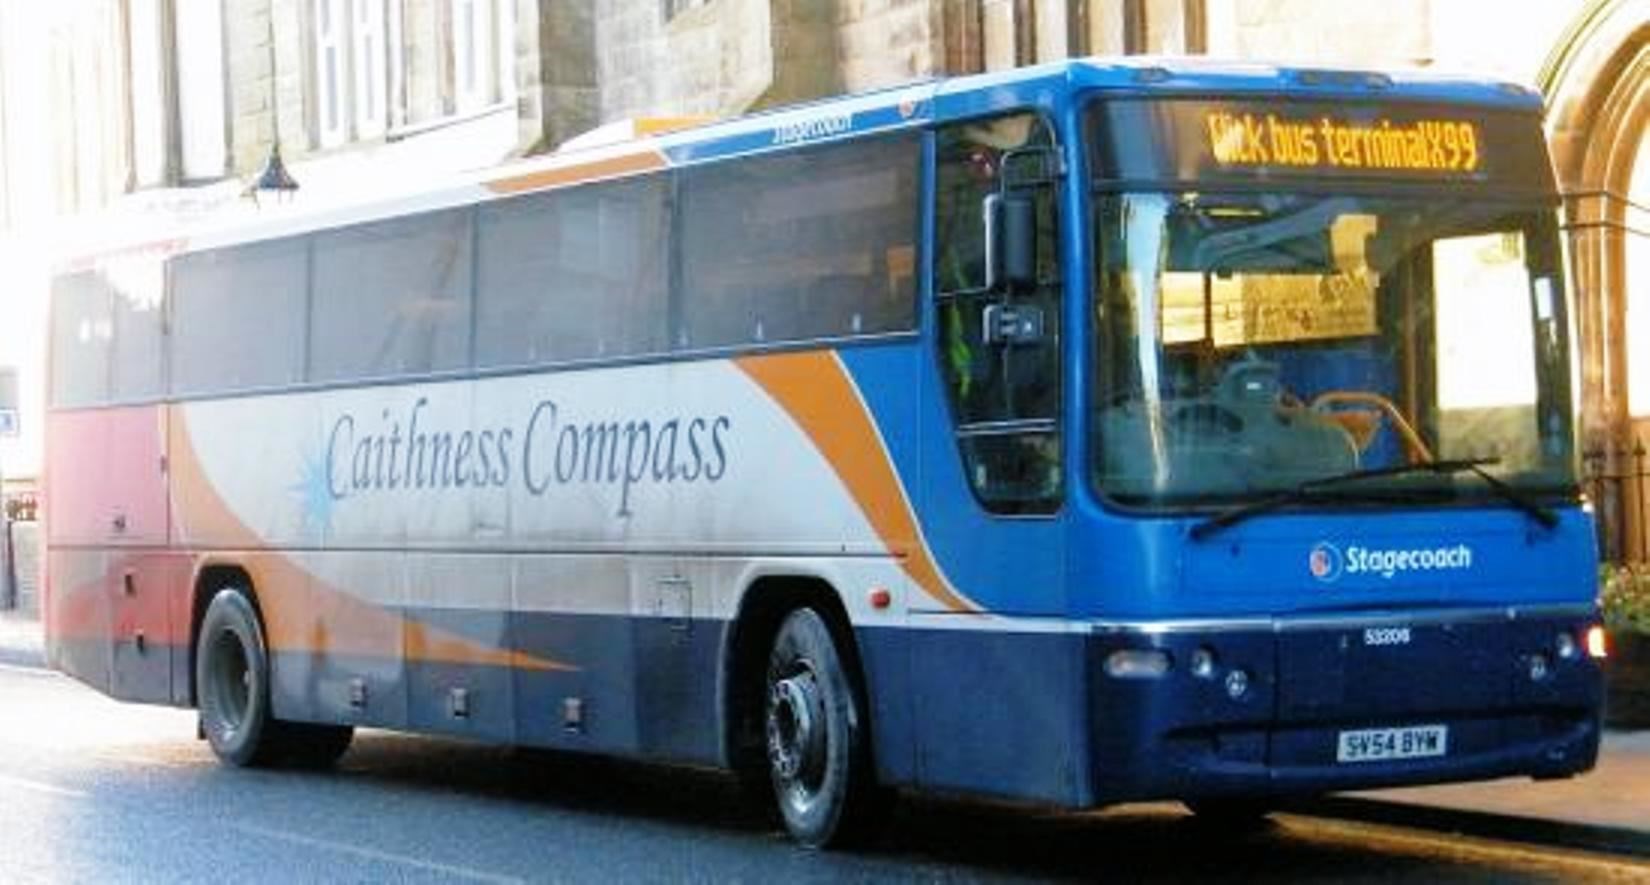 Changes introduced by Stagecoach should improve Gills ferry connections